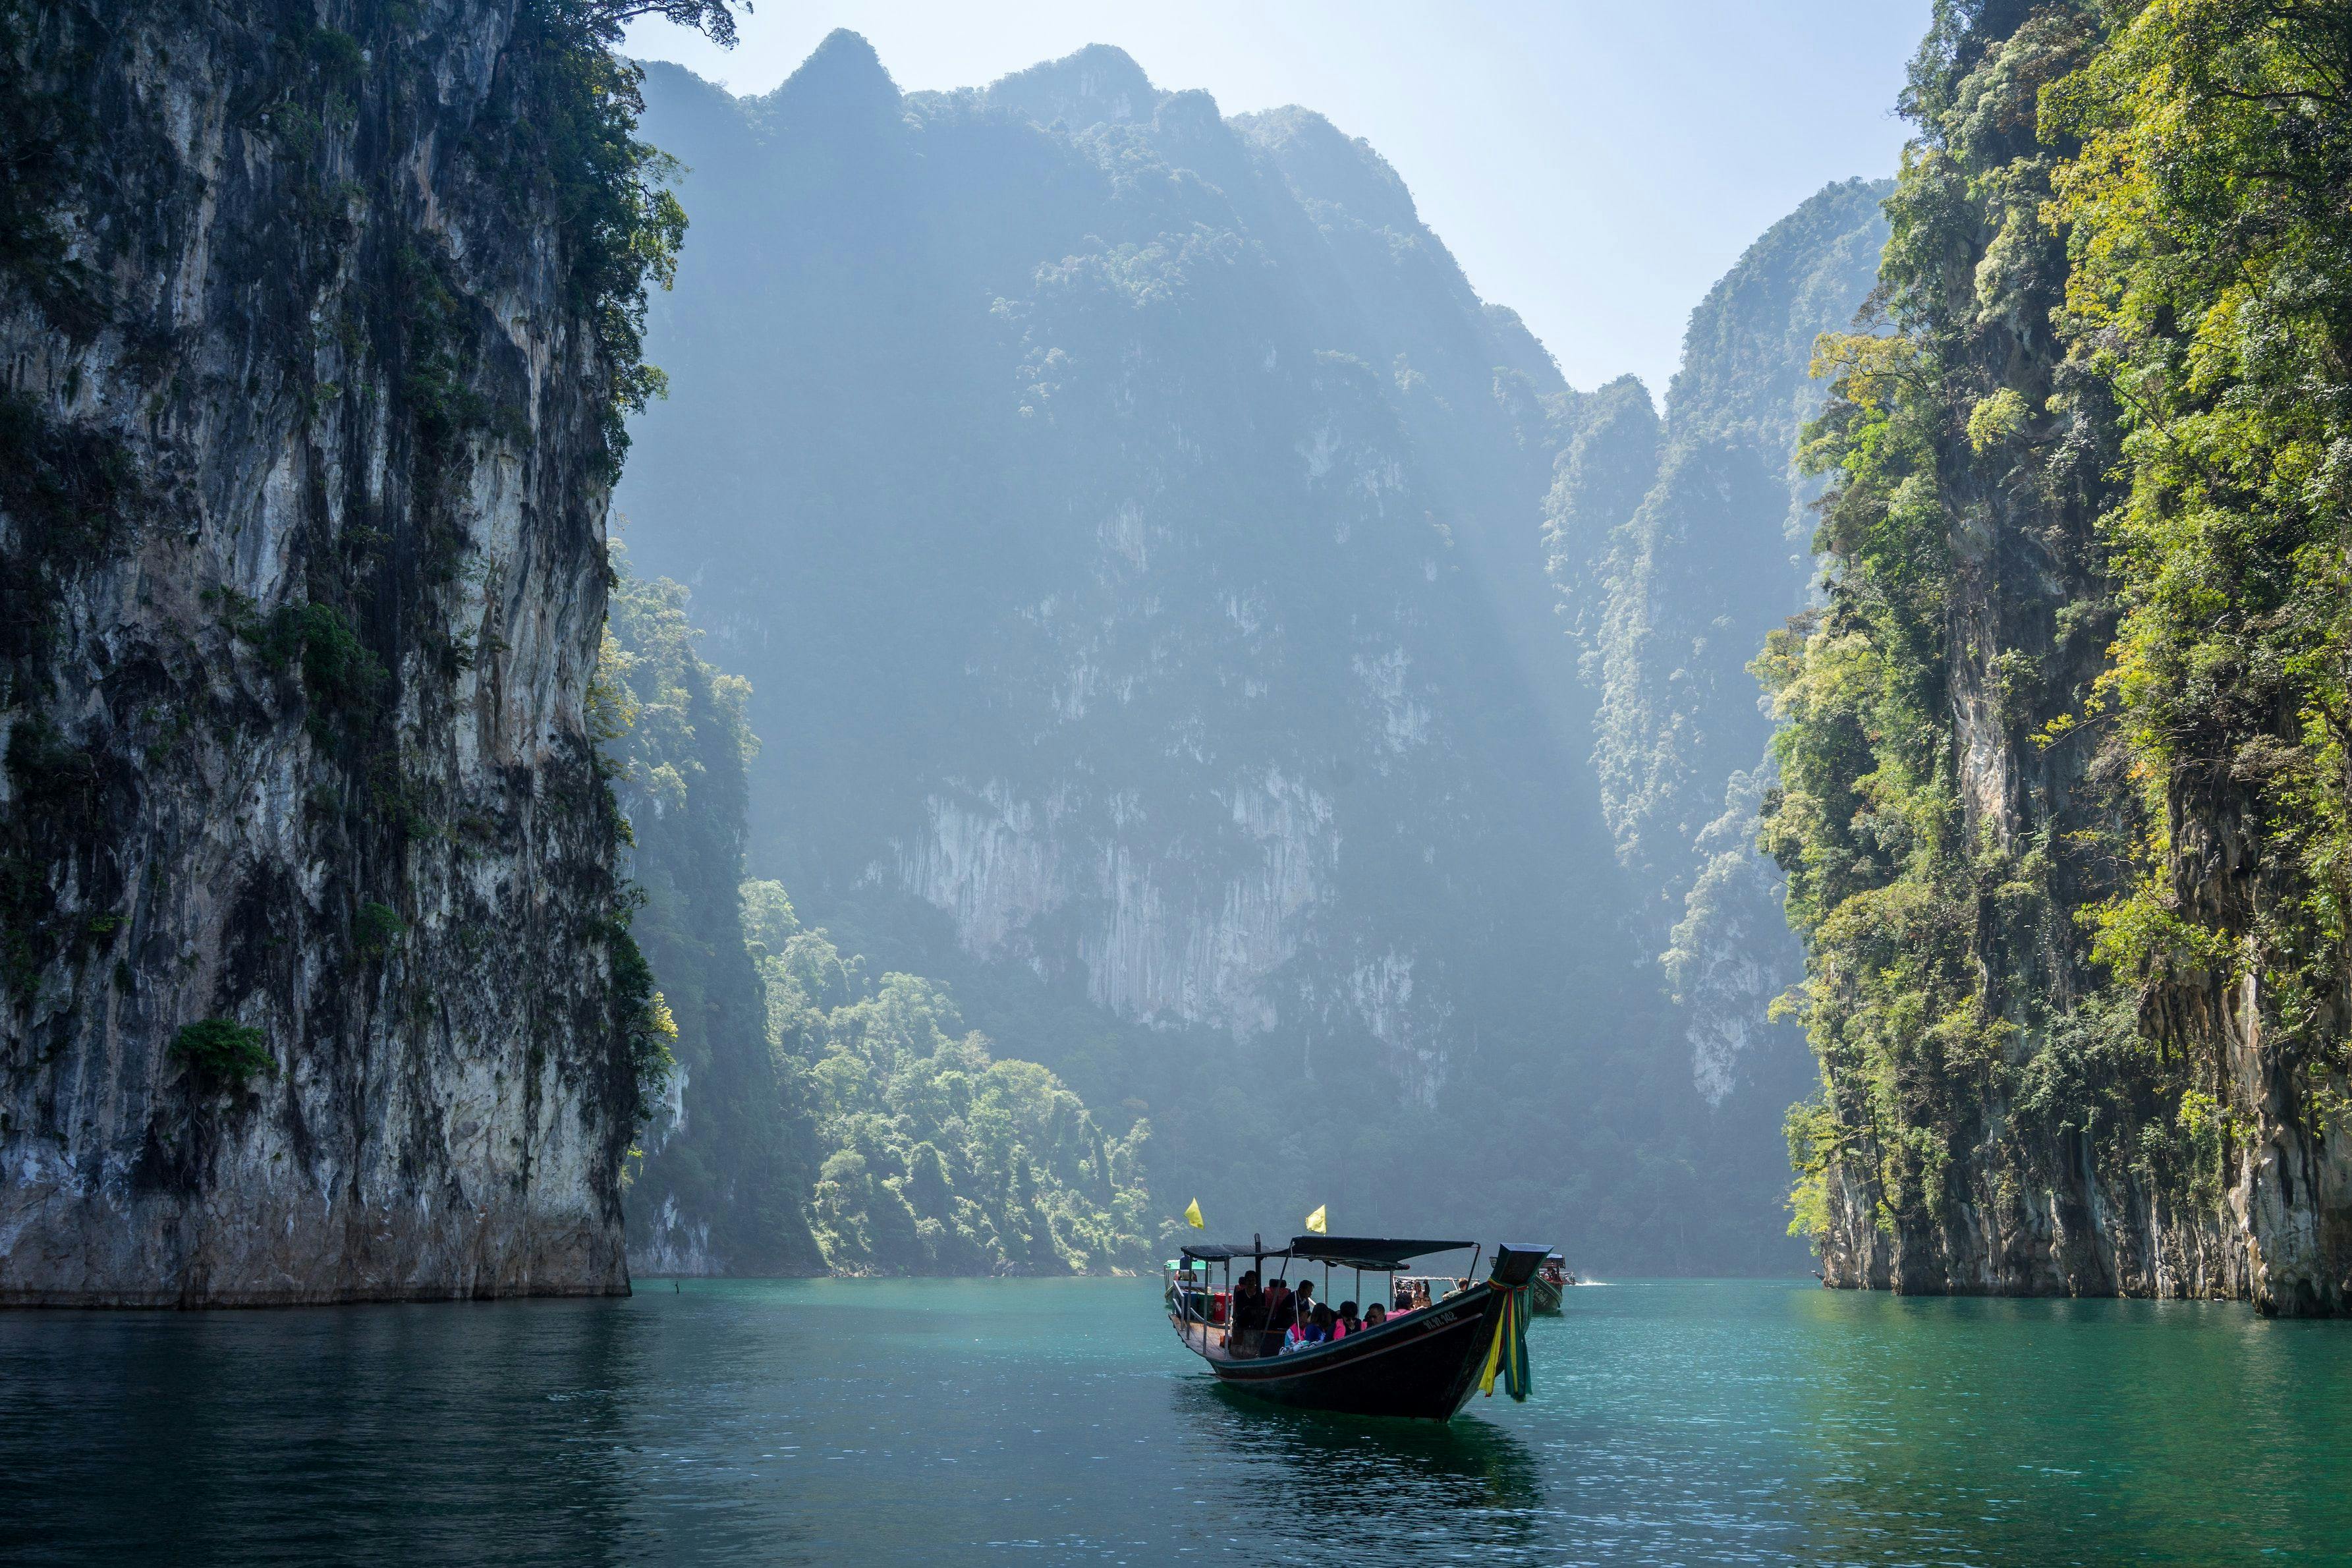 Longtail boat in Khao Sok national park in Thailand.